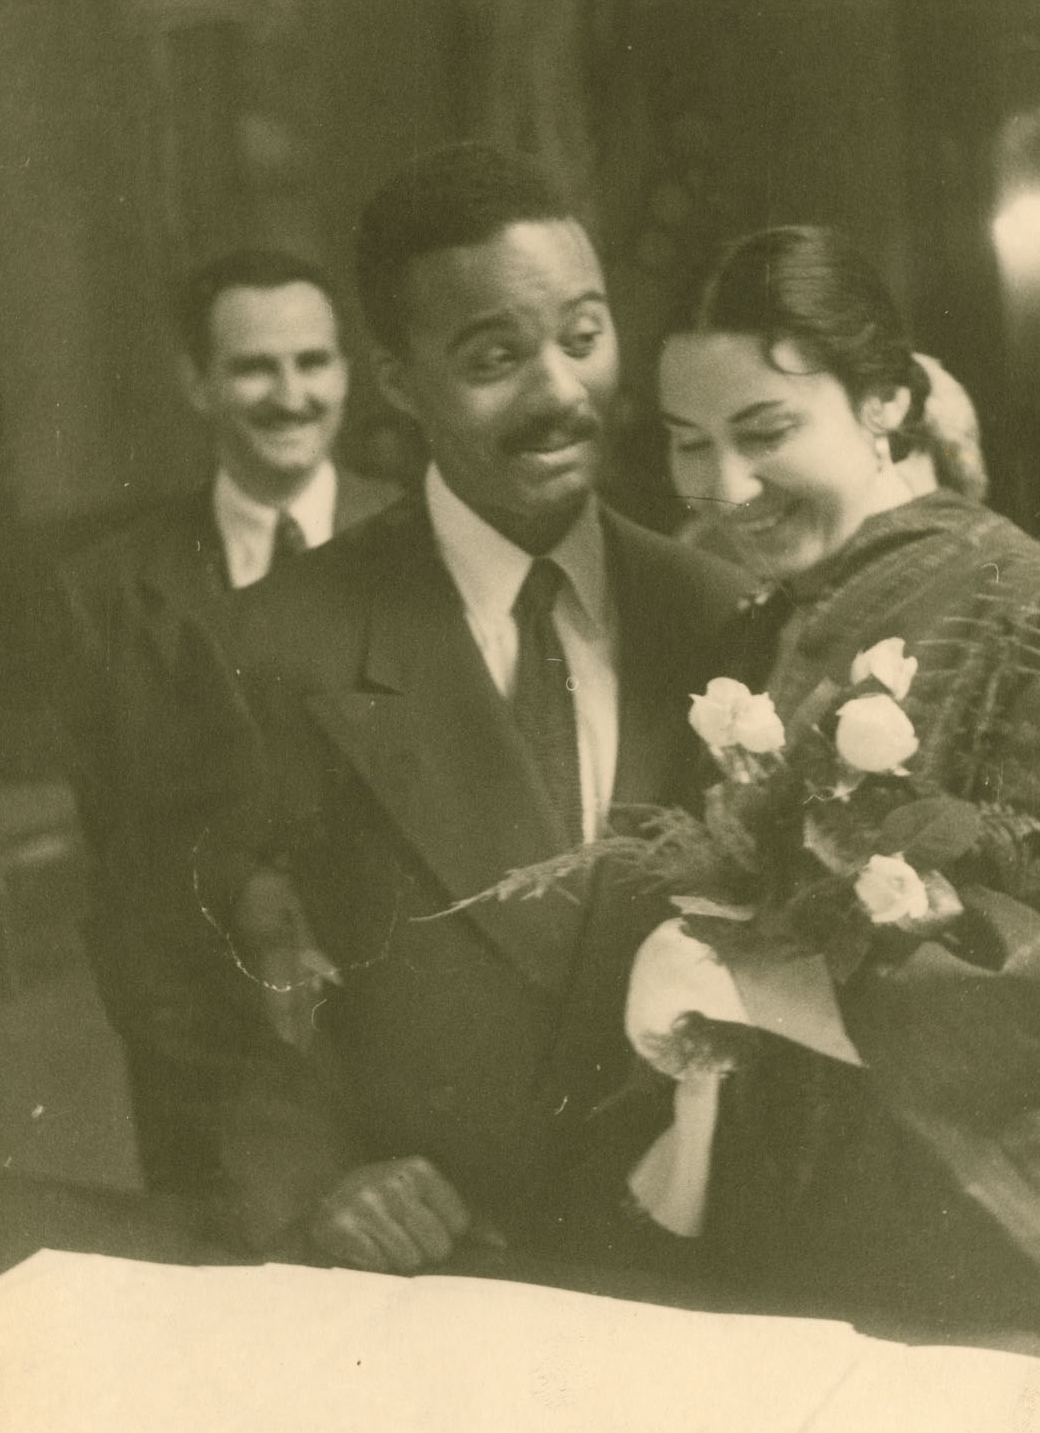 Black and white photograph of John and Richenda Rhoden's wedding day on April 21, 1954 in Rome, Italy